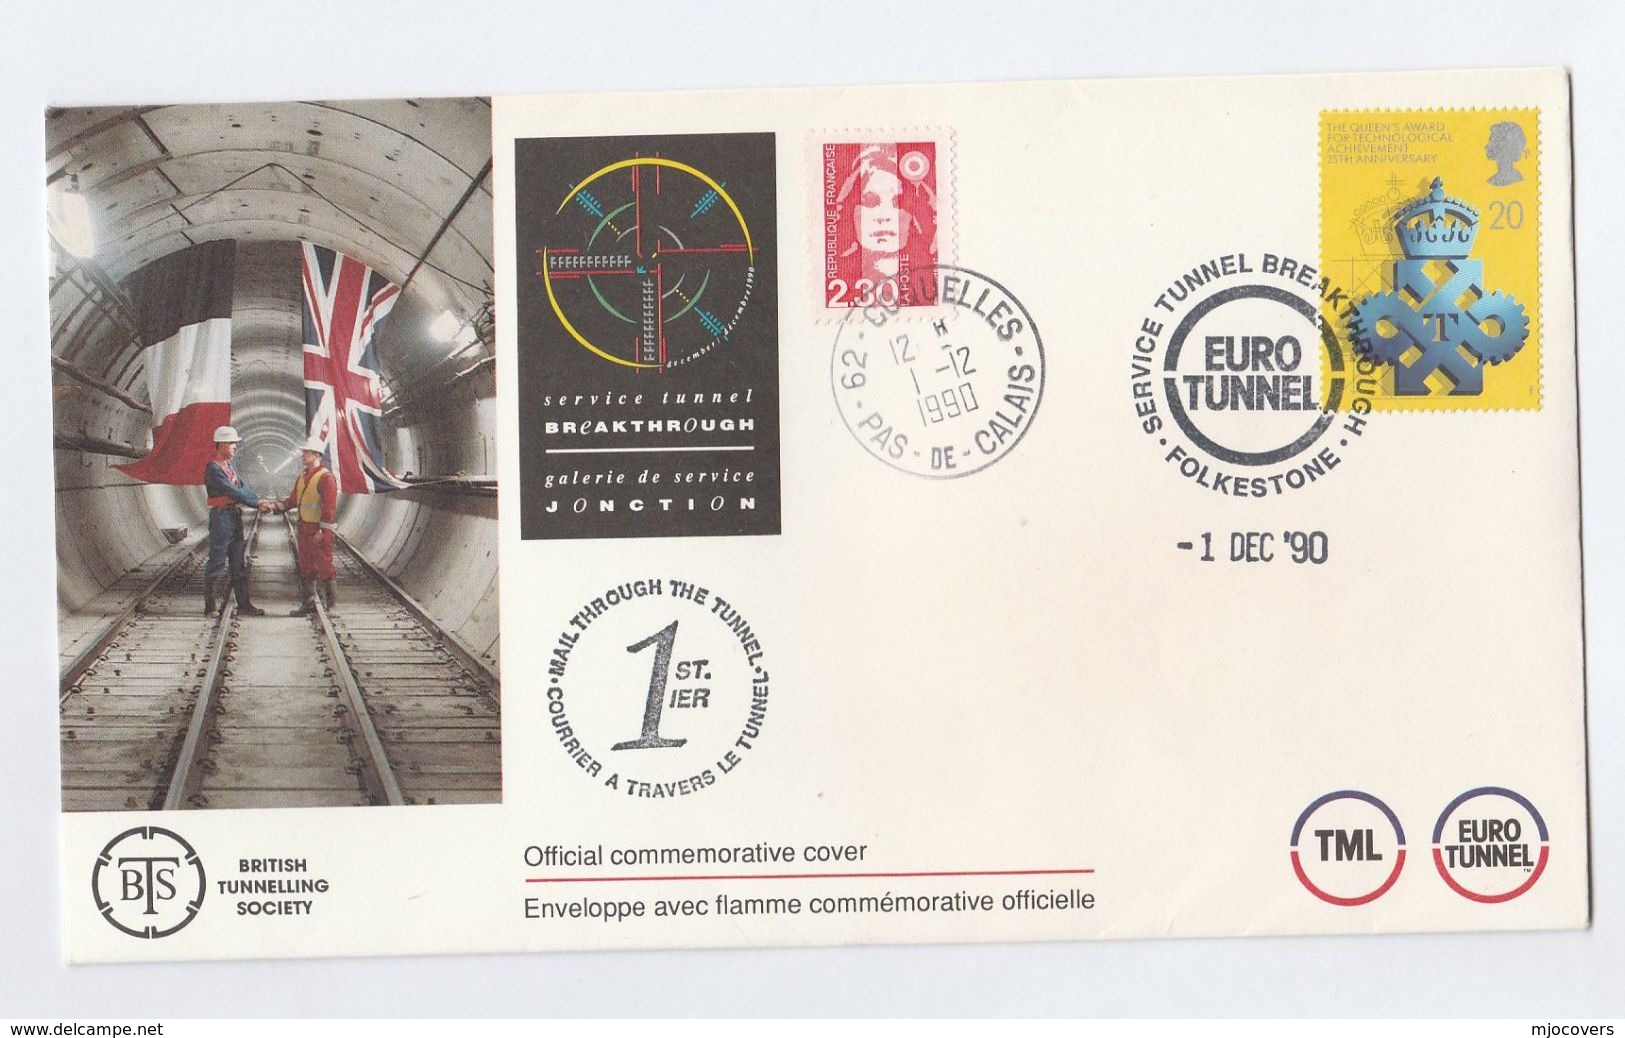 1990 CHANNEL RAILWAY TUNNEL Special Joint GB FRANCE CARRIED THROUGH TUNNEL Cover Train Stamps Event - Trains